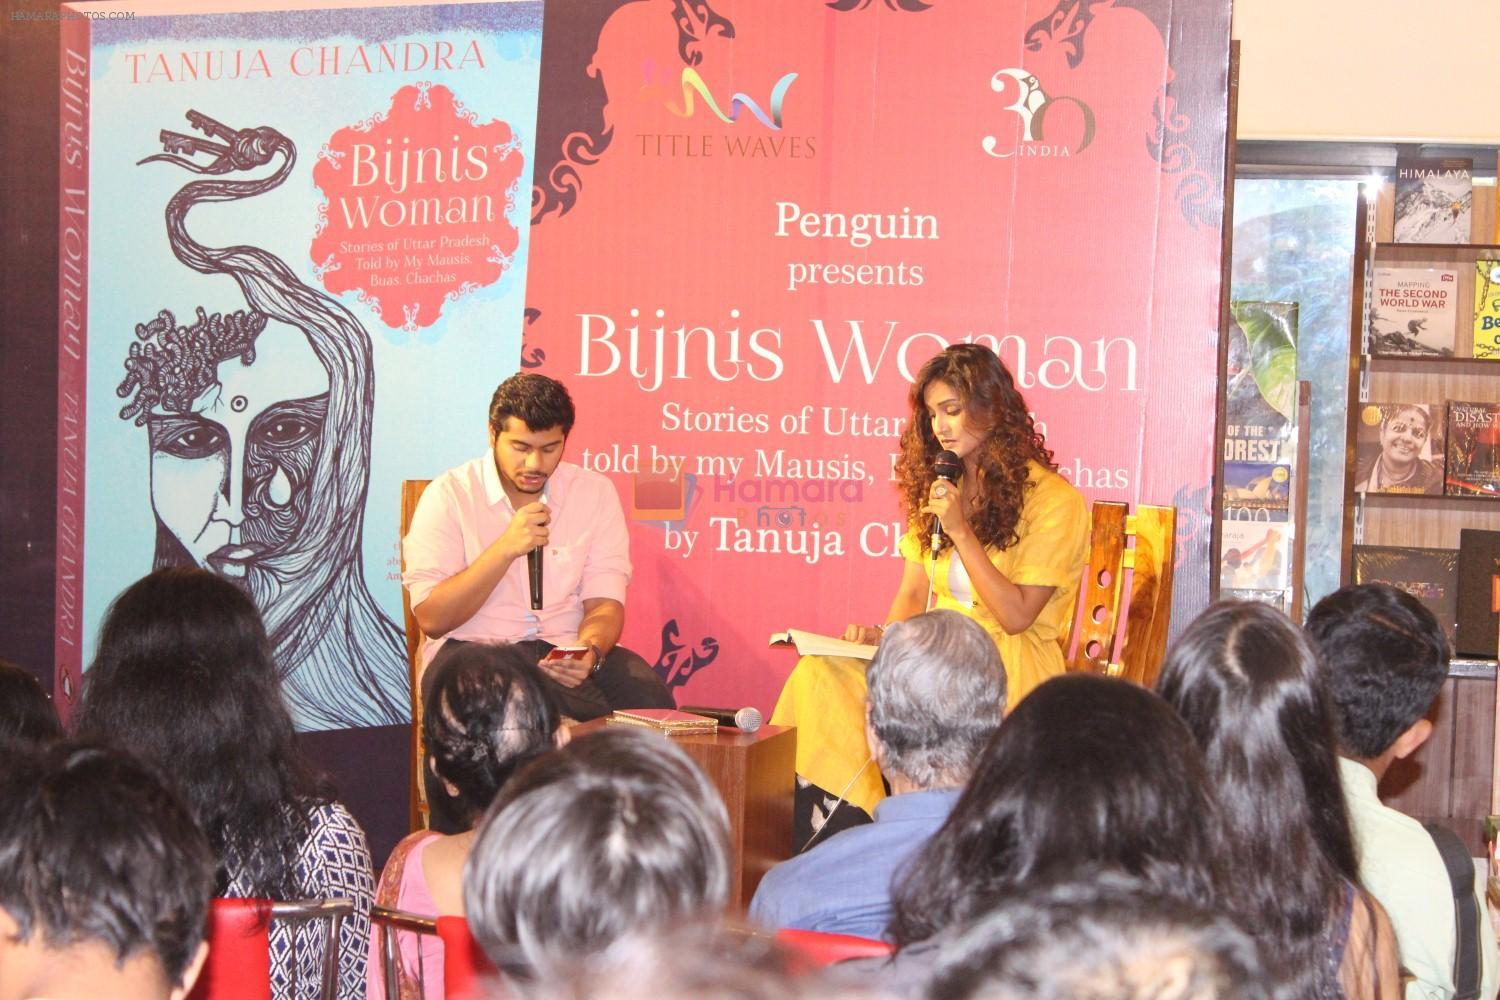 Mukti Mohan Launch Of Tanuja Chandra's Book Bijnis women on 8th May 2017